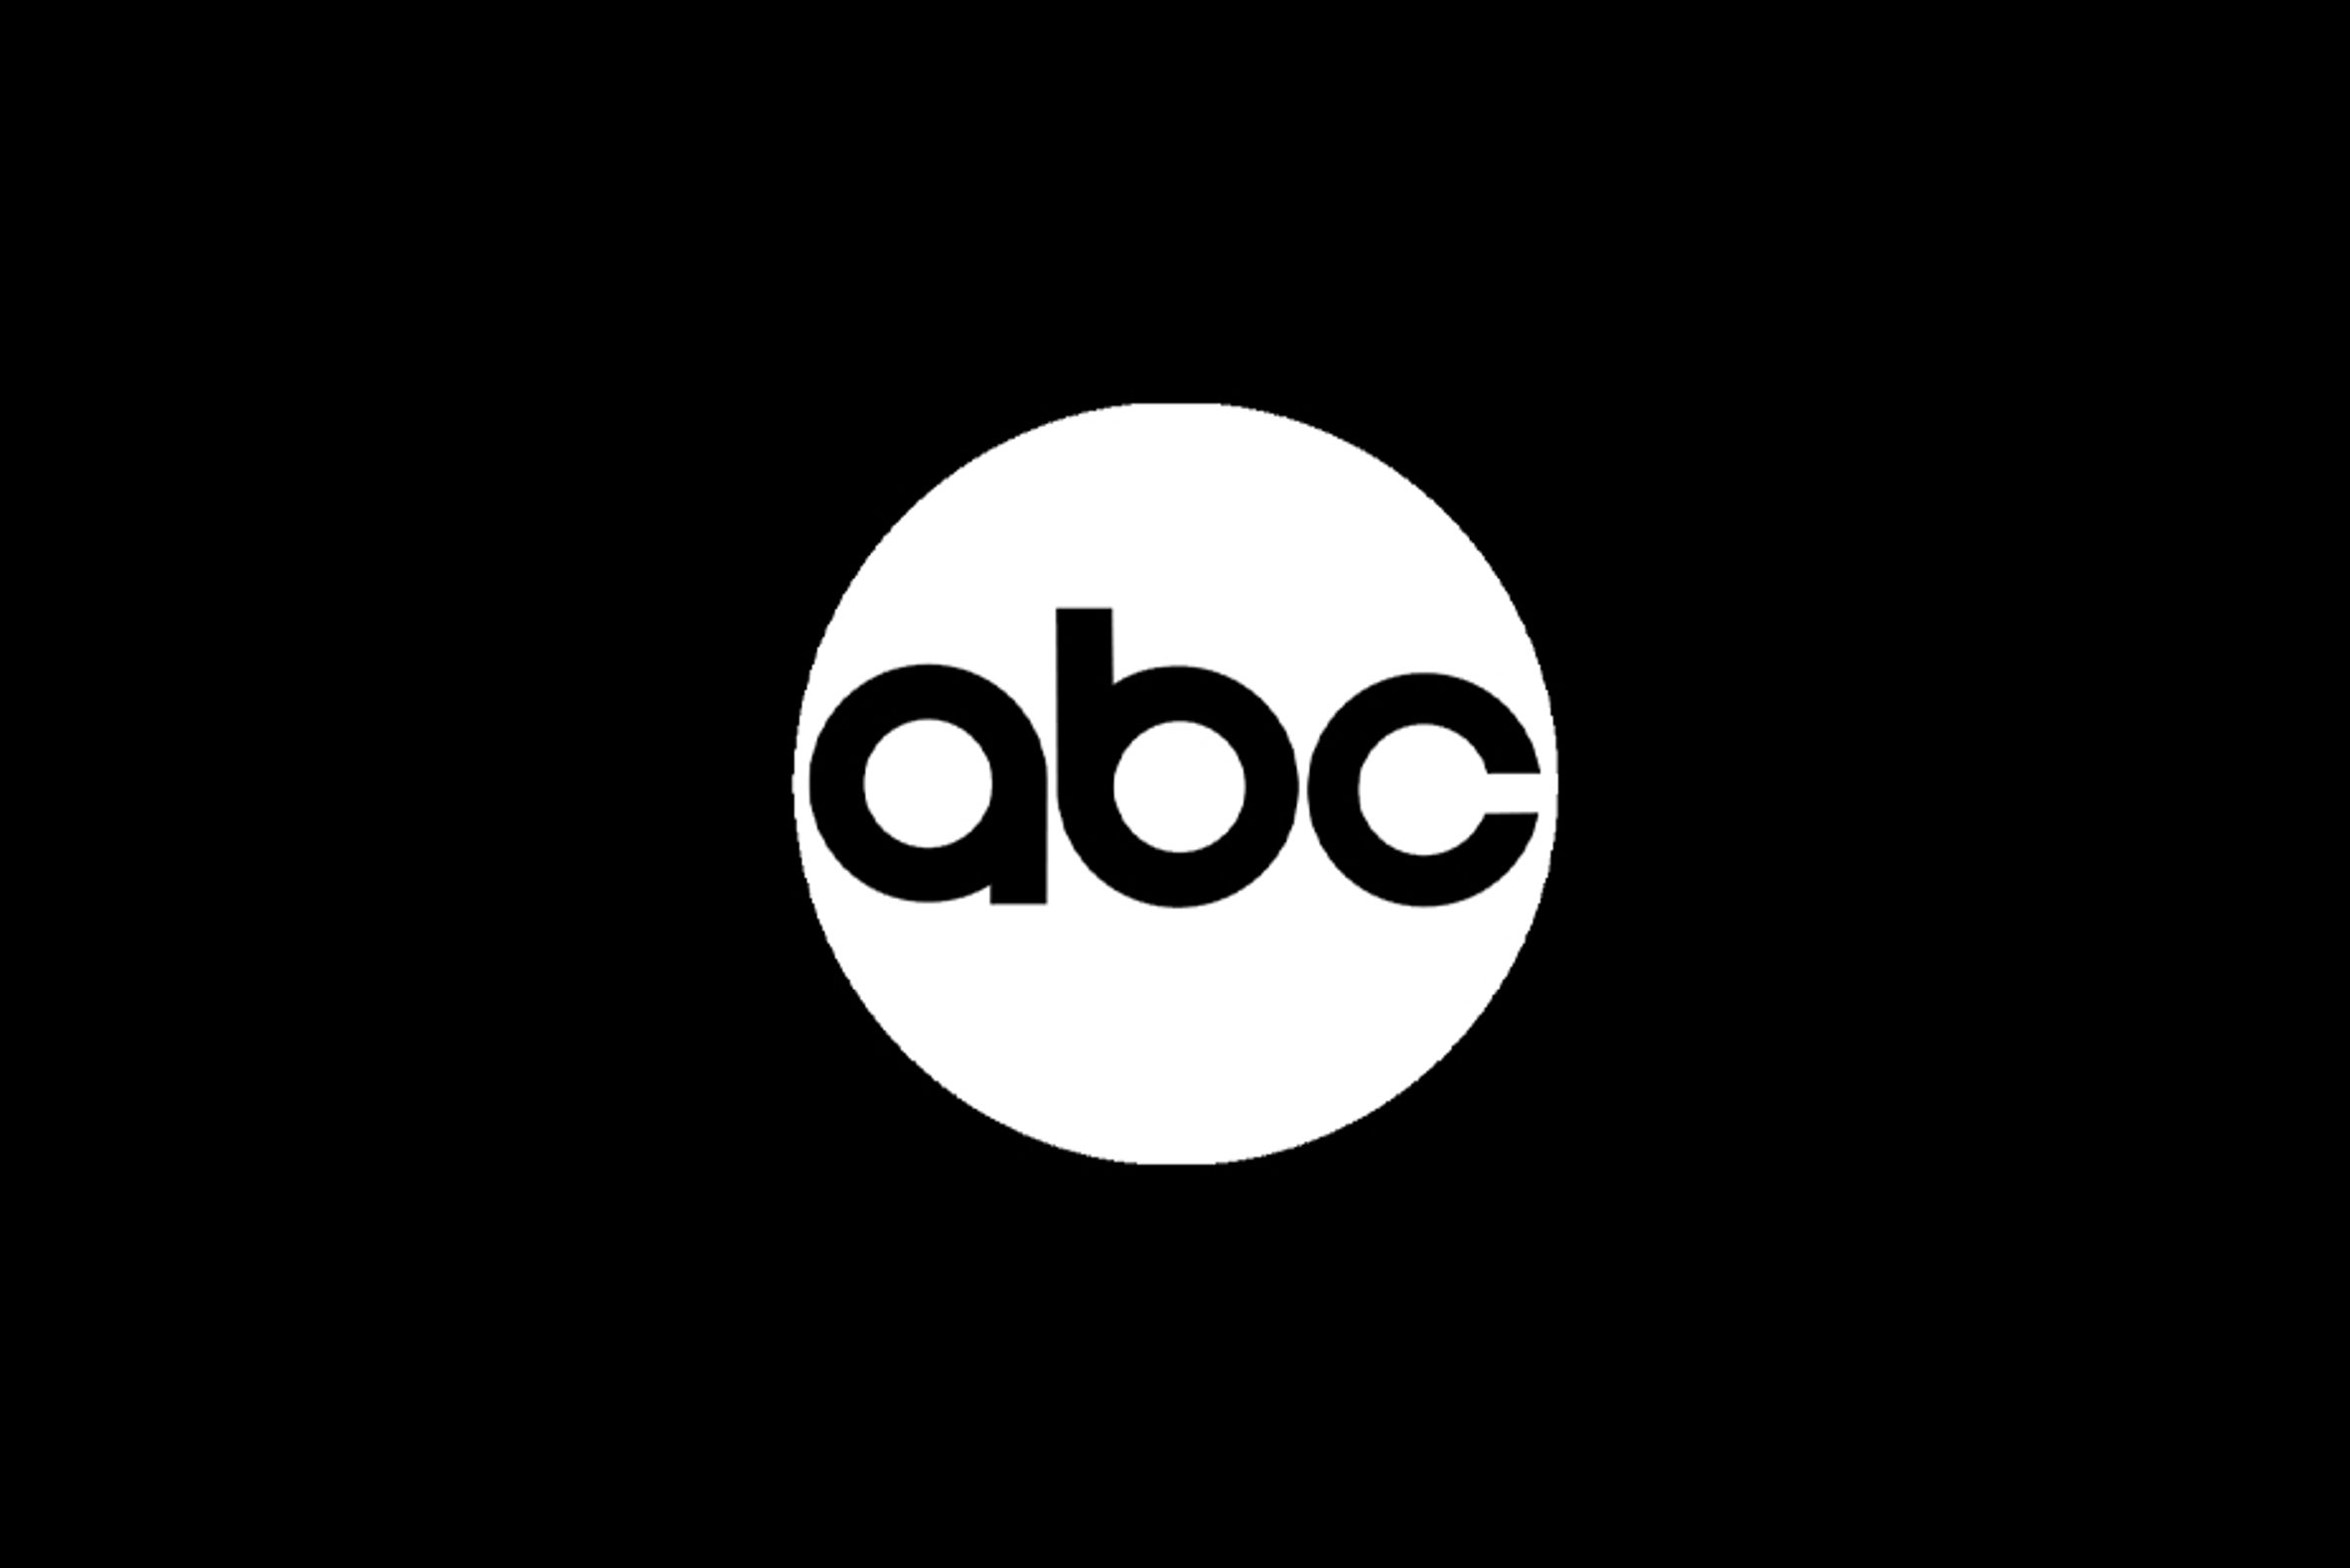 ABC’s Emergence is Now Hiring Photo Doubles